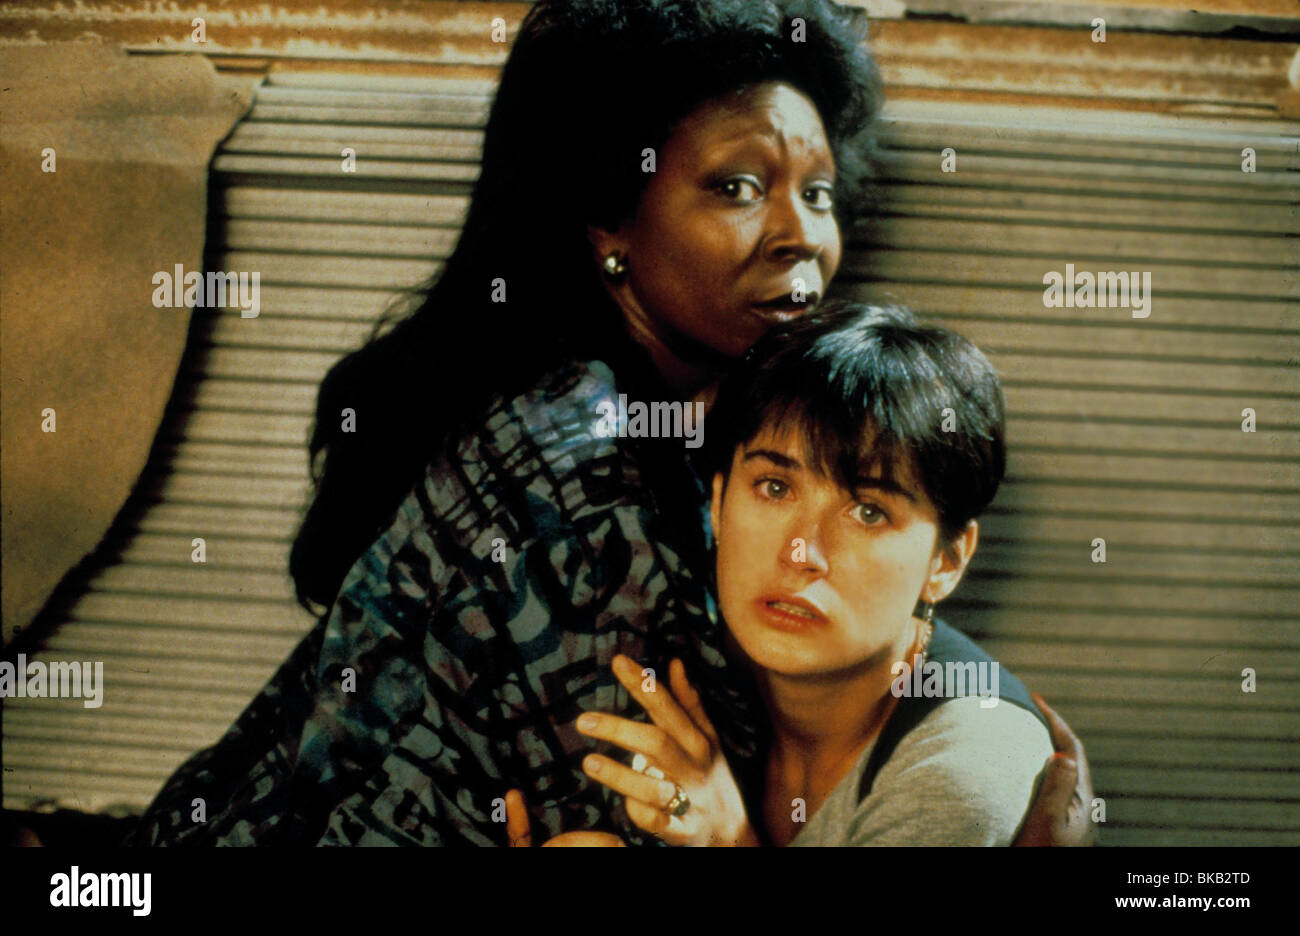 GHOST (1990) Whoopi Goldberg, DEMI MOORE SGH 042 Banque D'Images